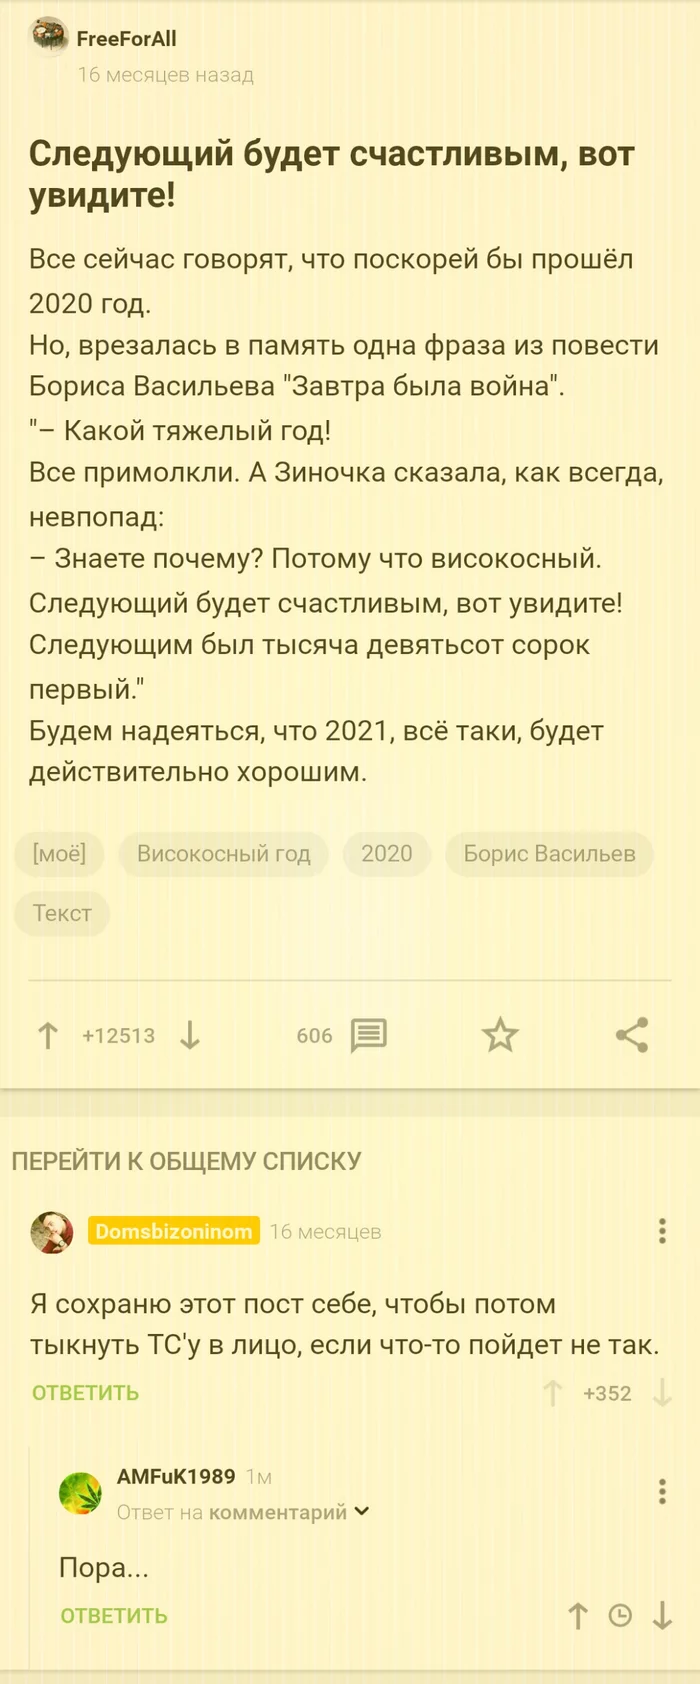 Response to the post The next one will be happy, you'll see! - My, Leap year, 2020, Boris Vasiliev, Screenshot, Comments on Peekaboo, 2021, Reply to post, Longpost